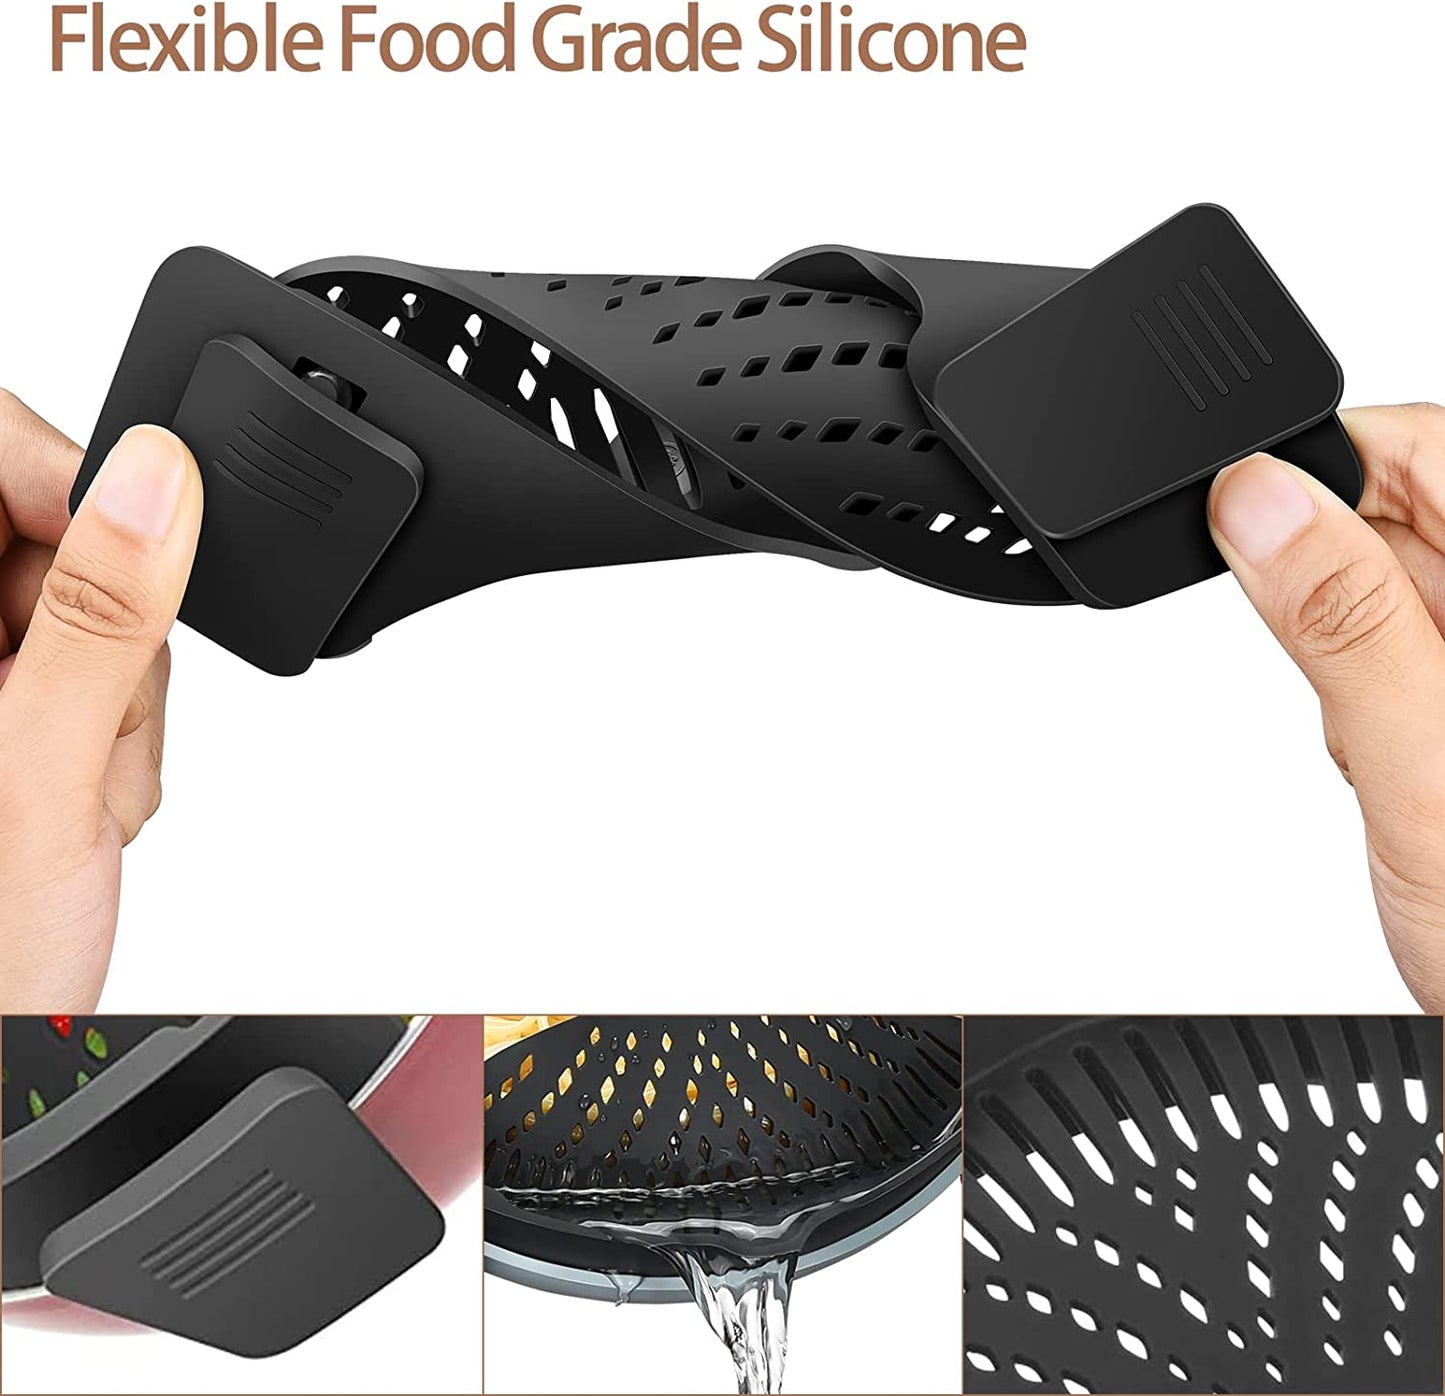 Silicone Food Strainer Clip Heat Resistant